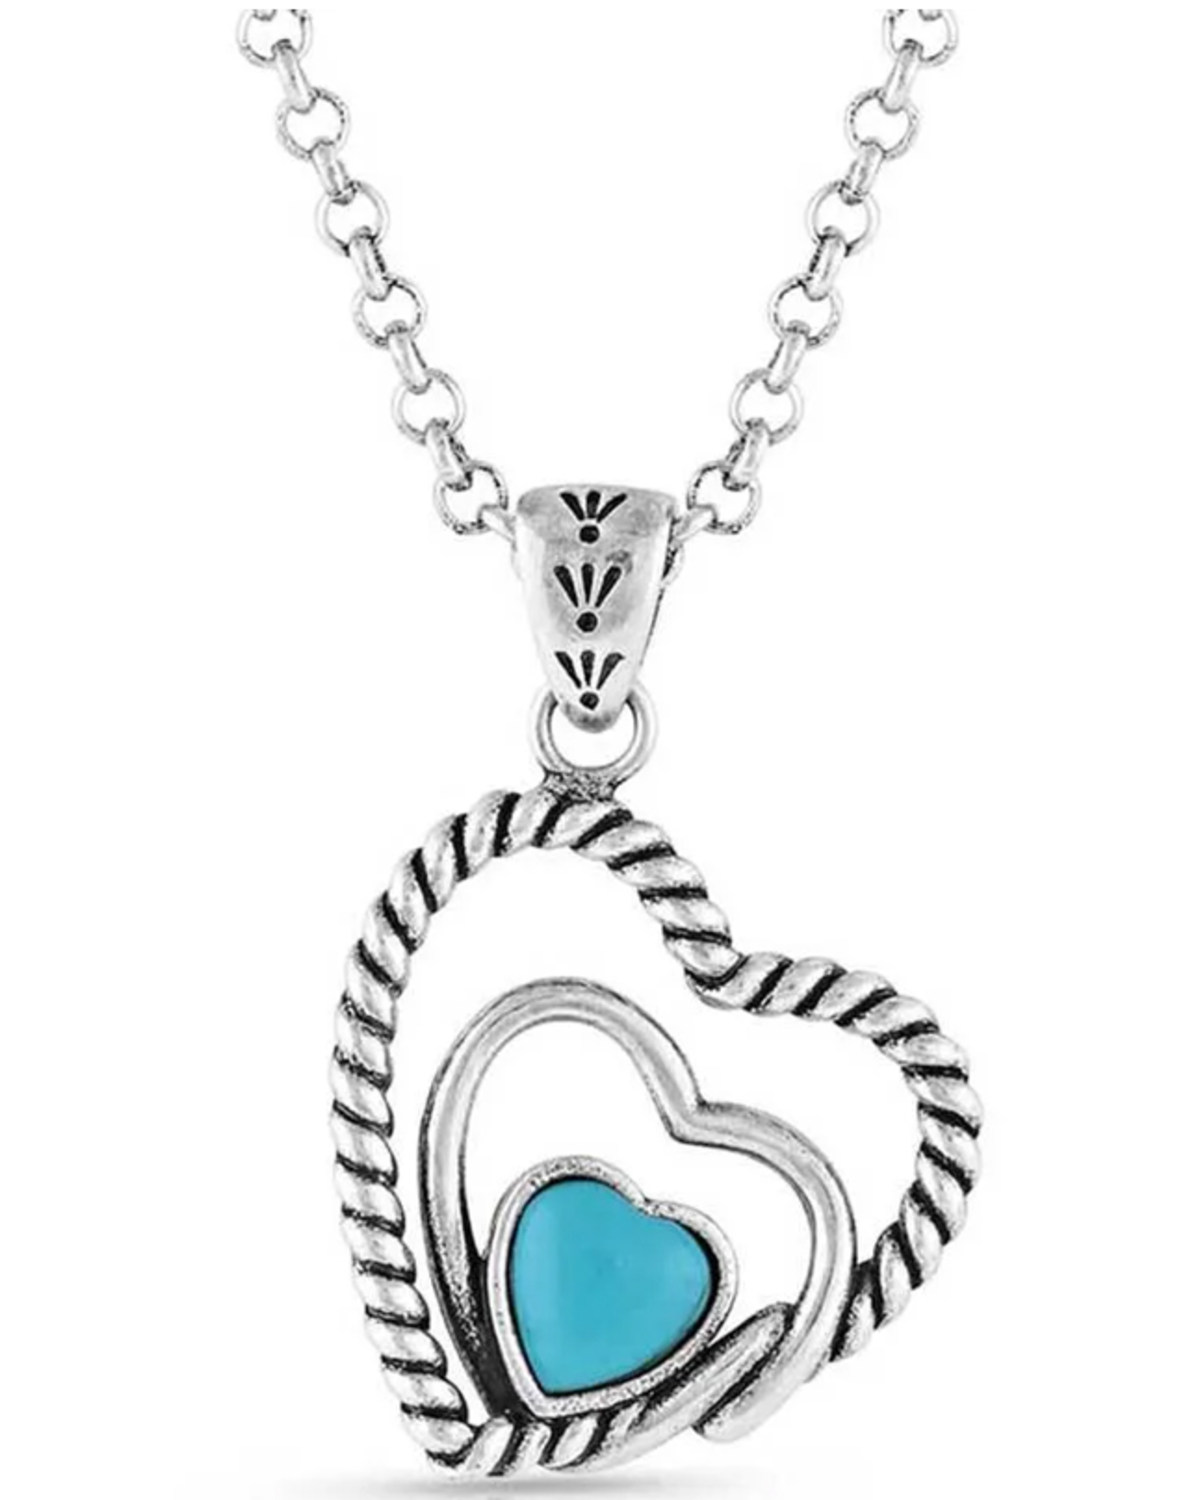 Montana Silversmiths Women's Clearer Ponds Turquoise Heart Necklace